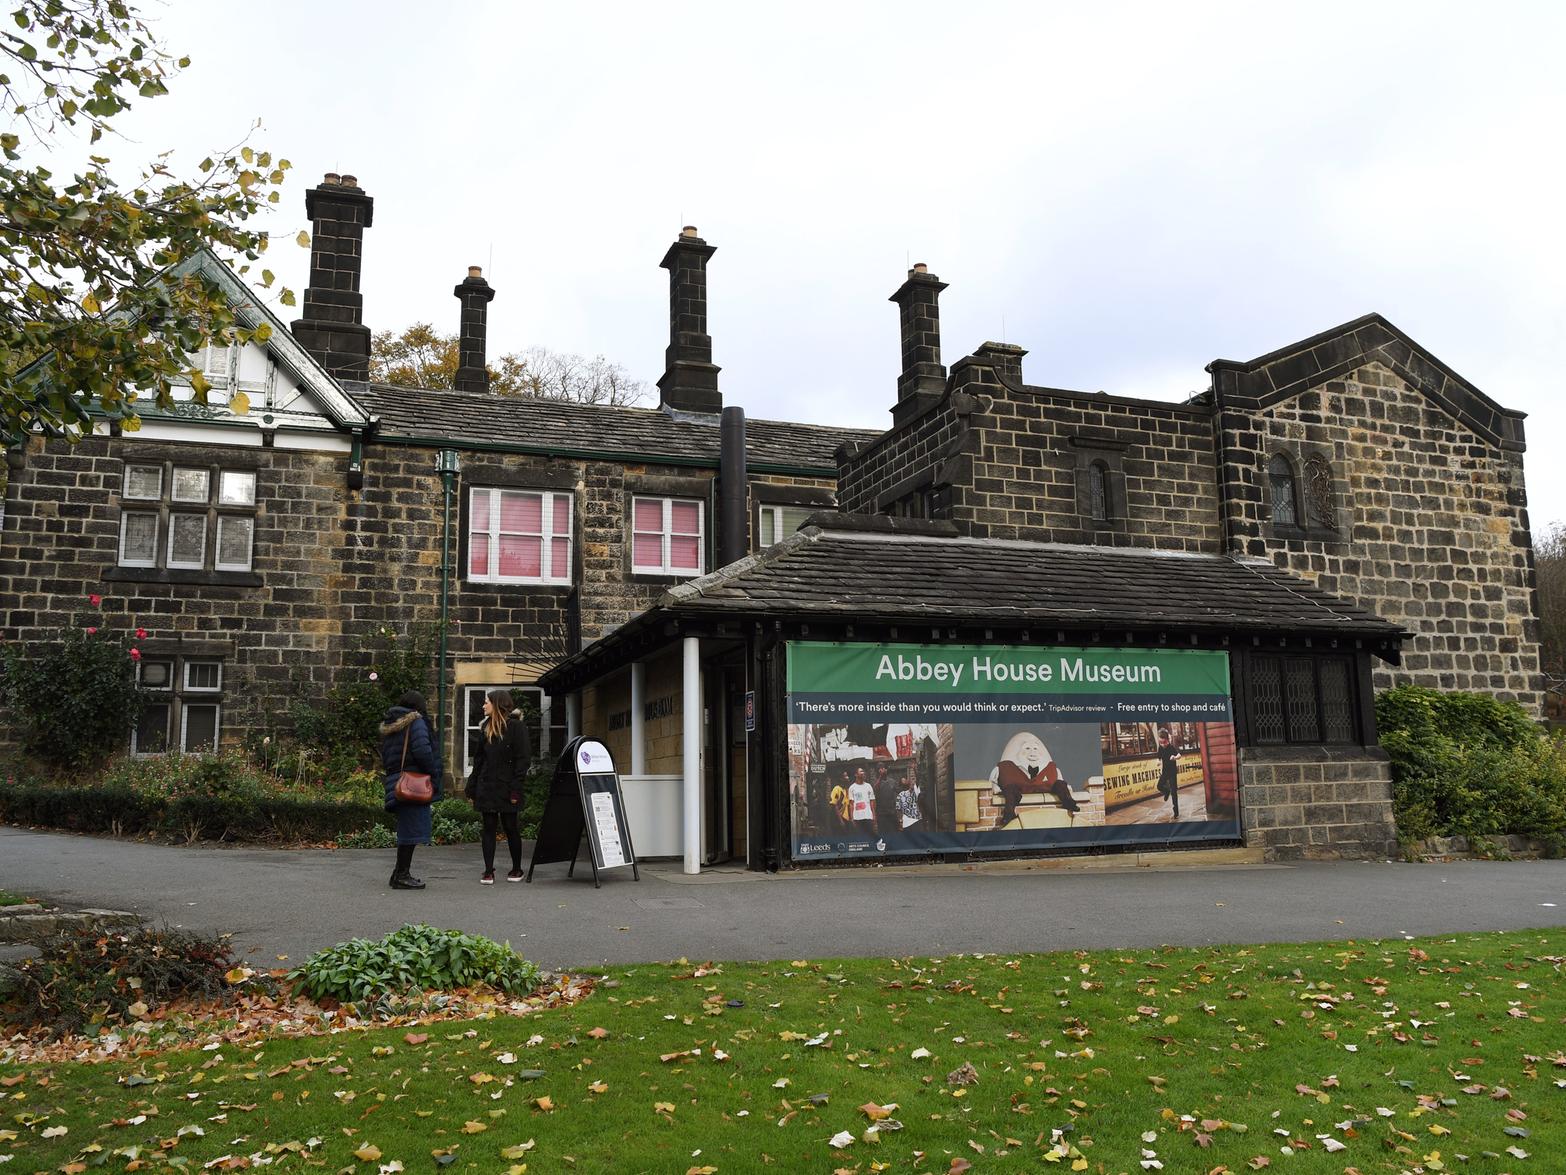 Opposite Kirkstall Abbey, kids can enjoy spooky science activities at this exhibition at Abbey House Museum. Features petrifying potions, bugs, goo and bubble snakes. Launches on Wednesday, October 30.